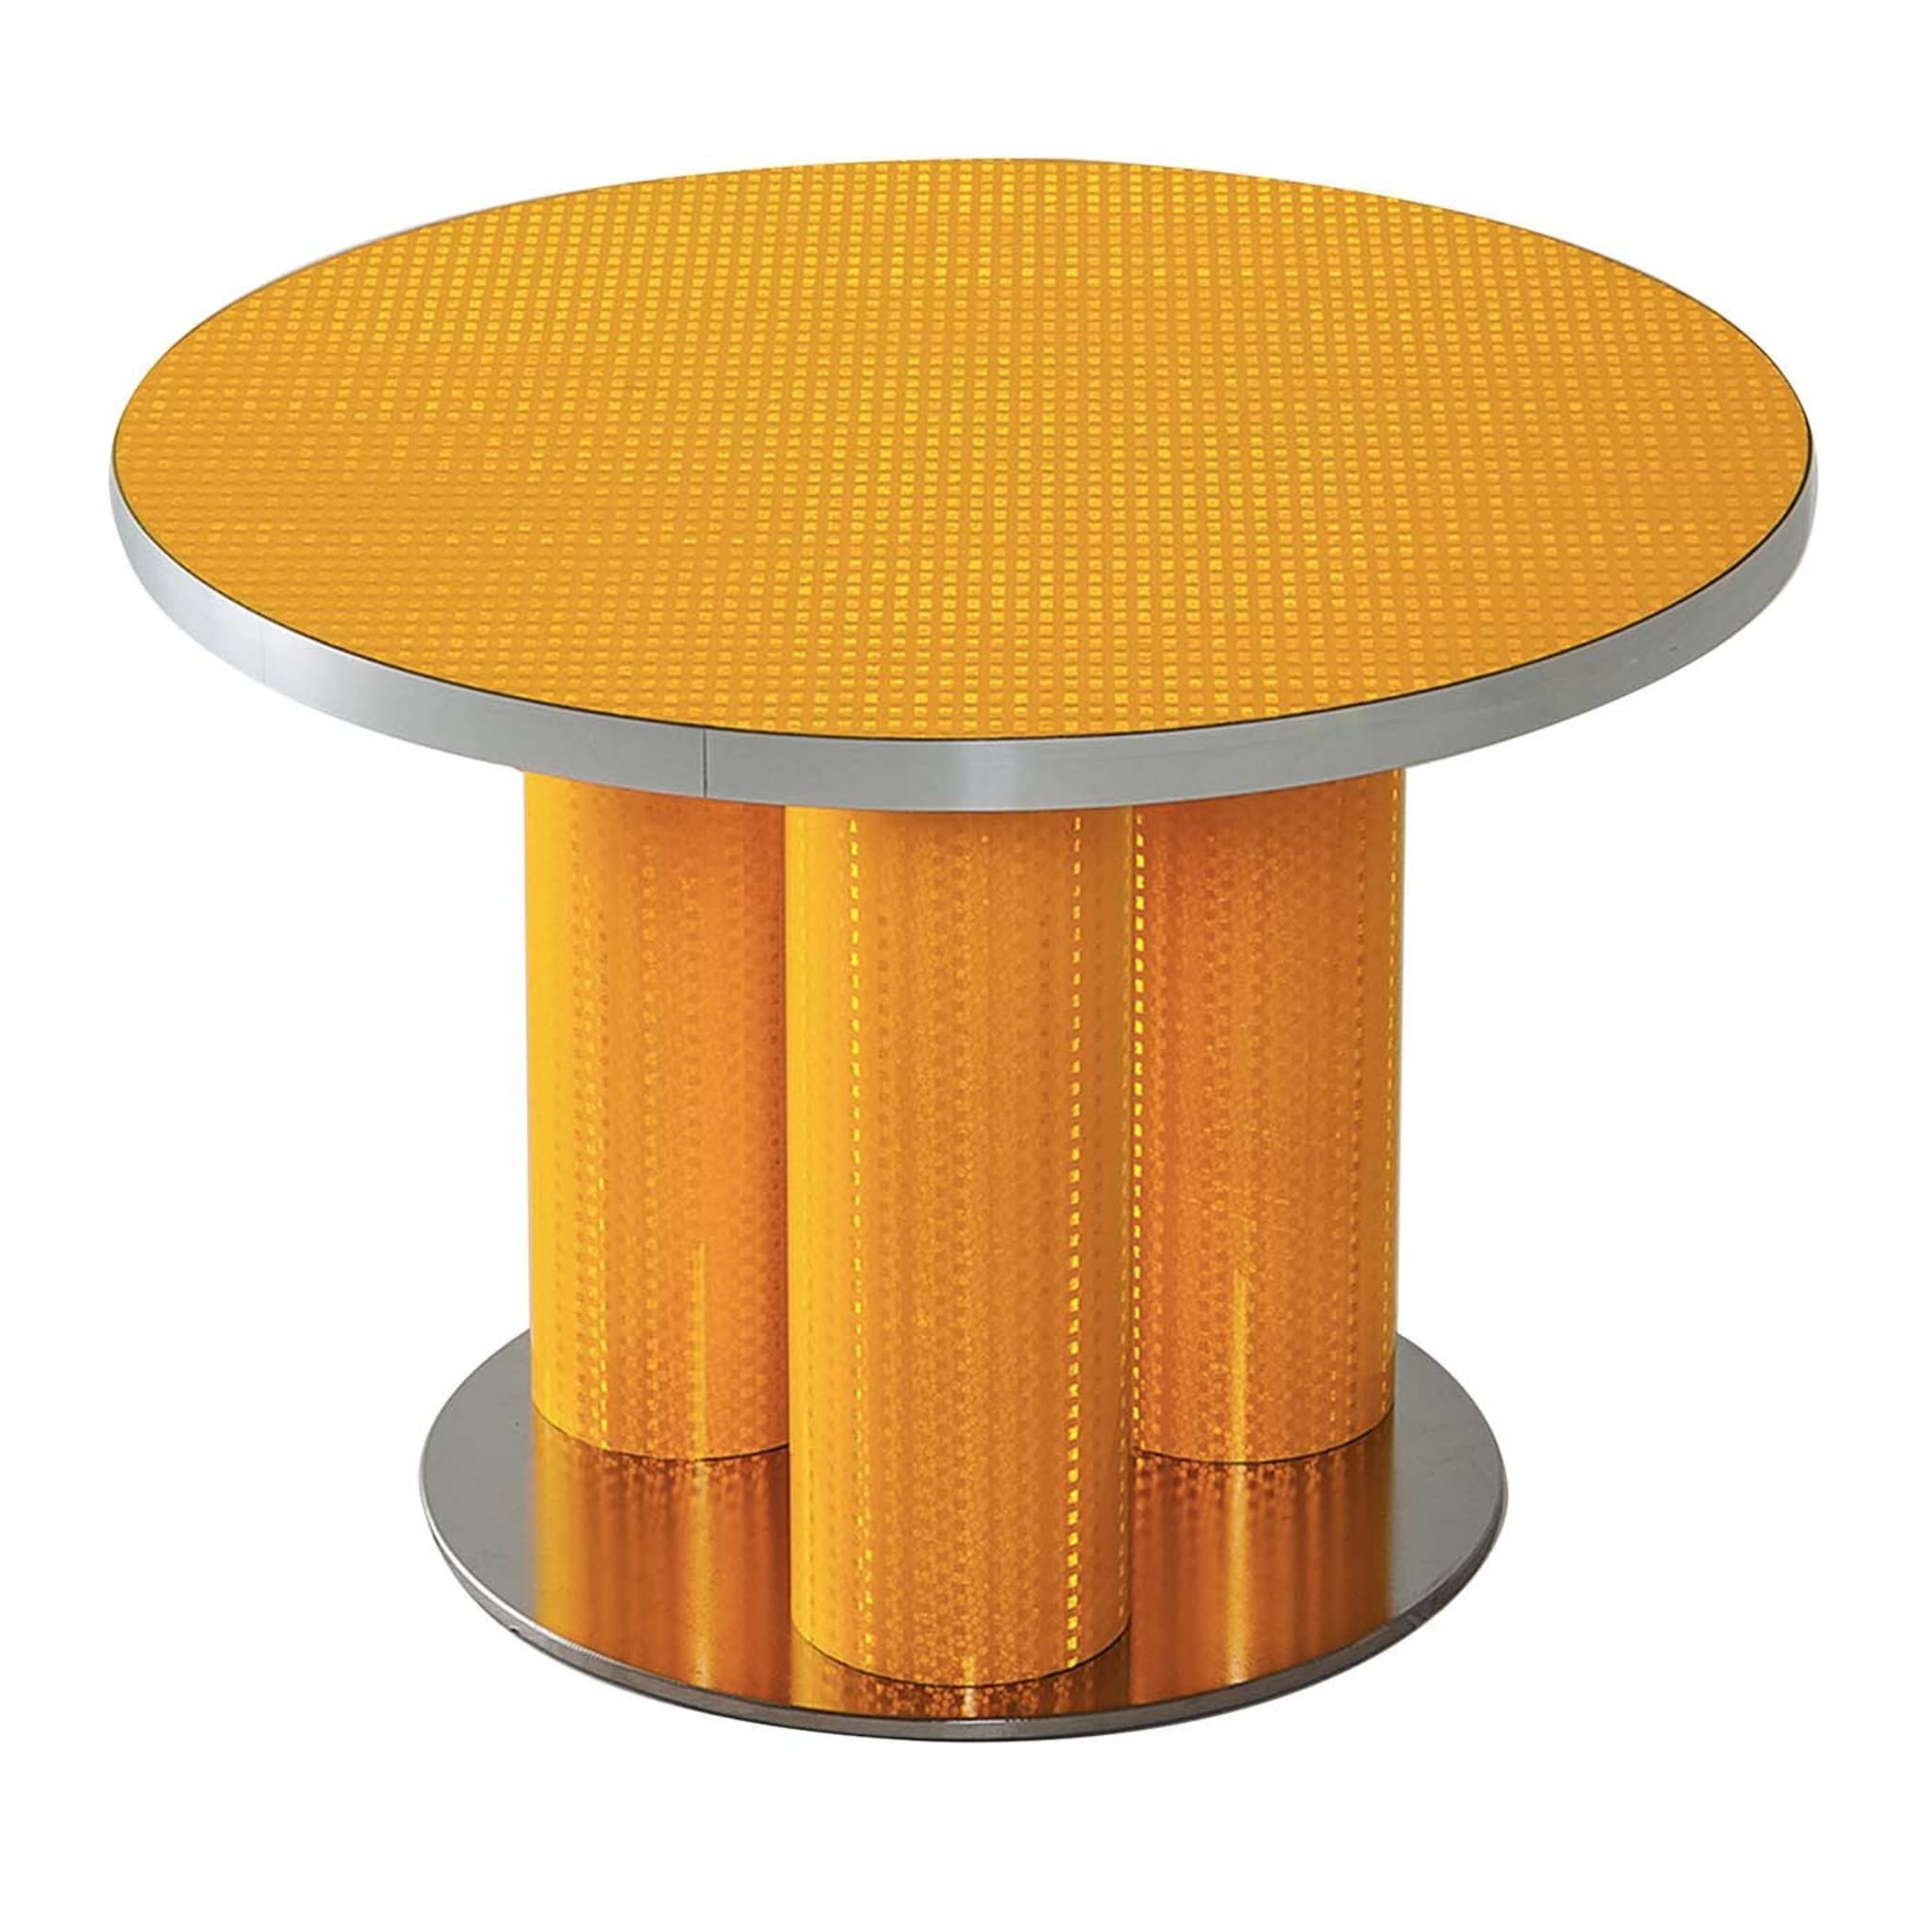 Reflective Collection - Orange round coffee table - Main view